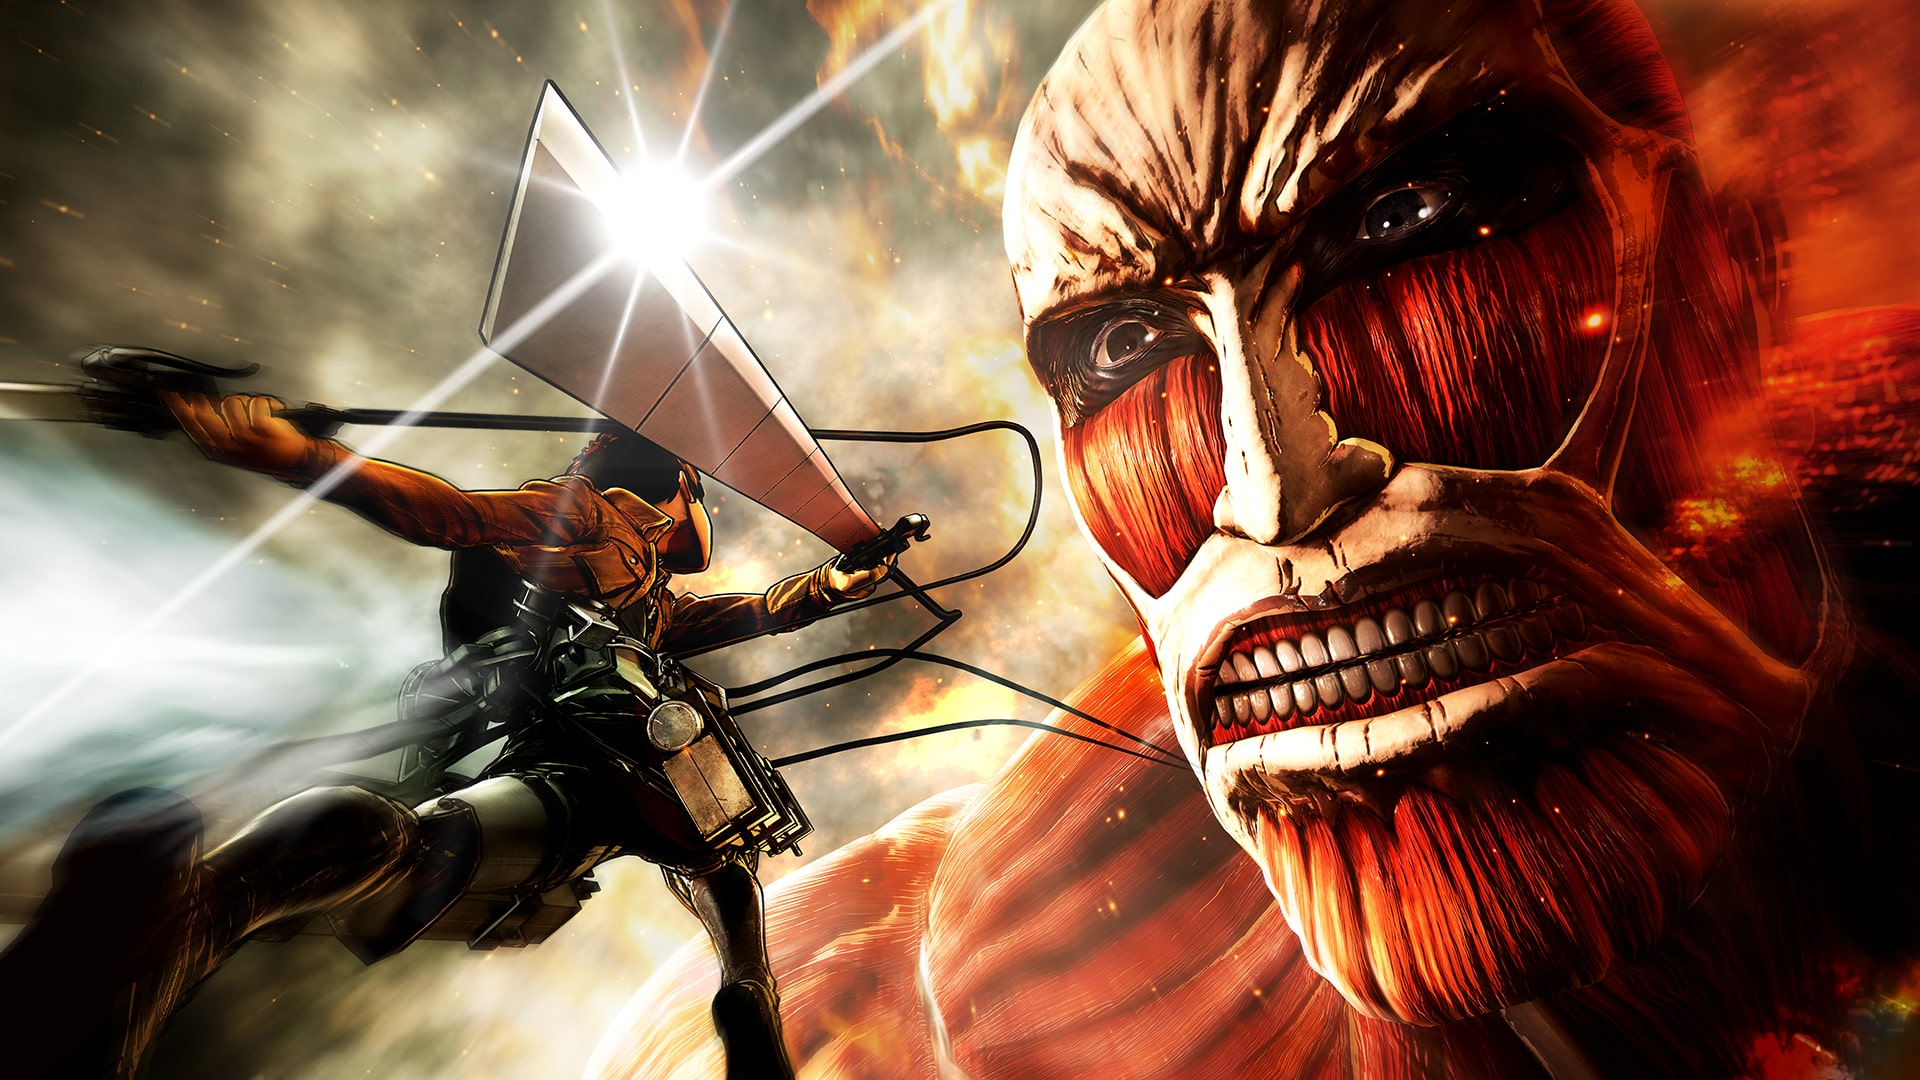 aot ps4 game